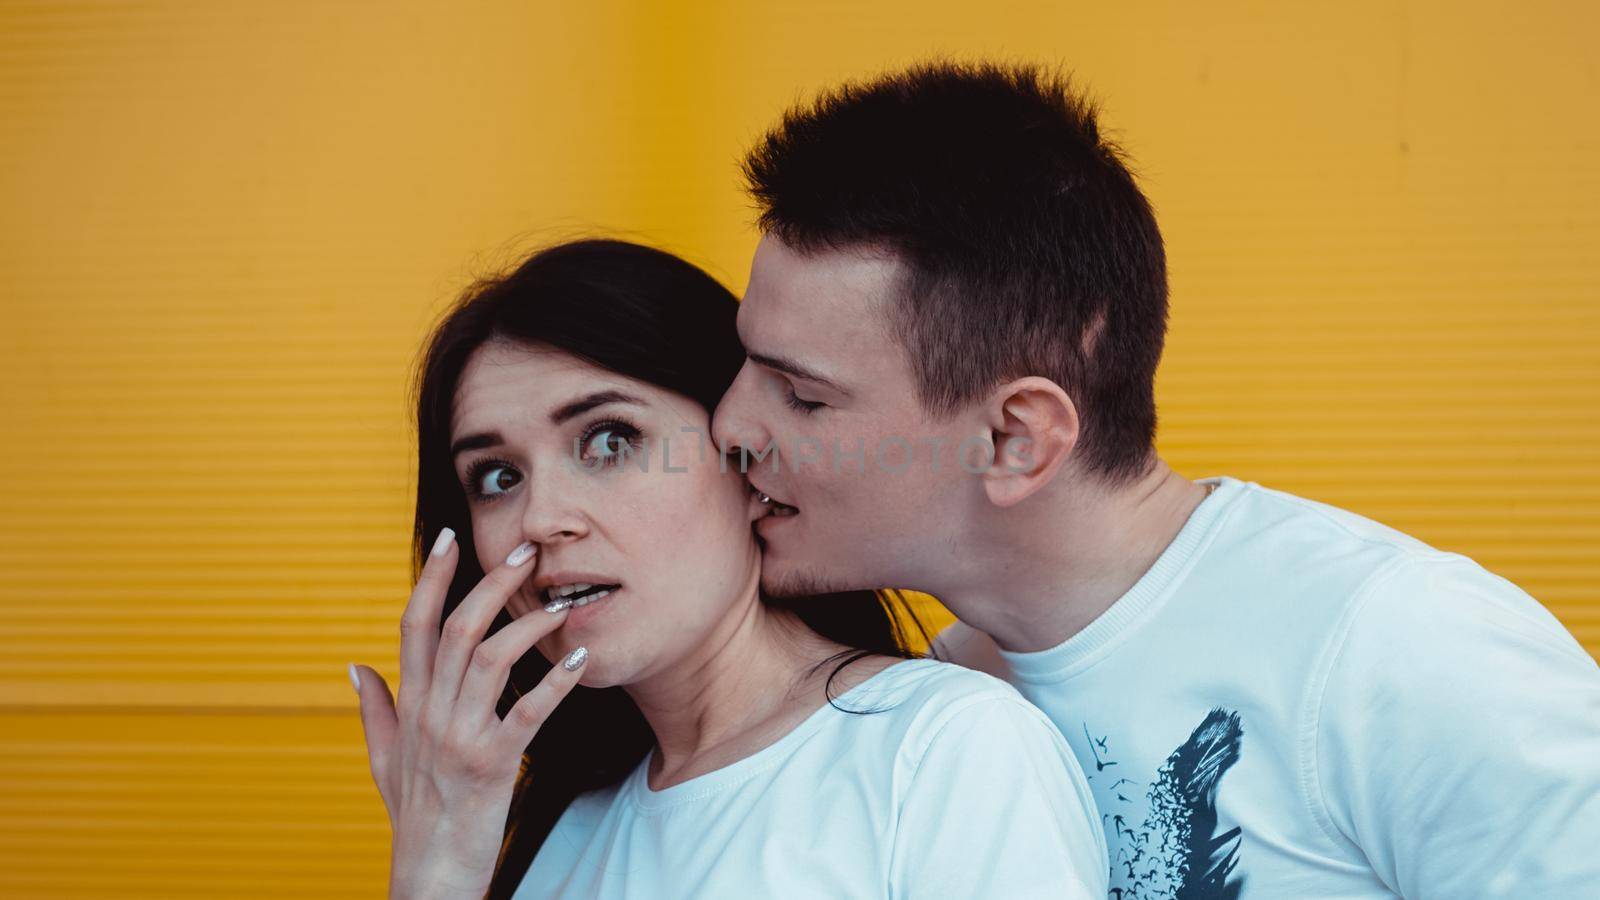 Funny young man bites his girlfriends ear and embracing her. Couple having fun - yellow background